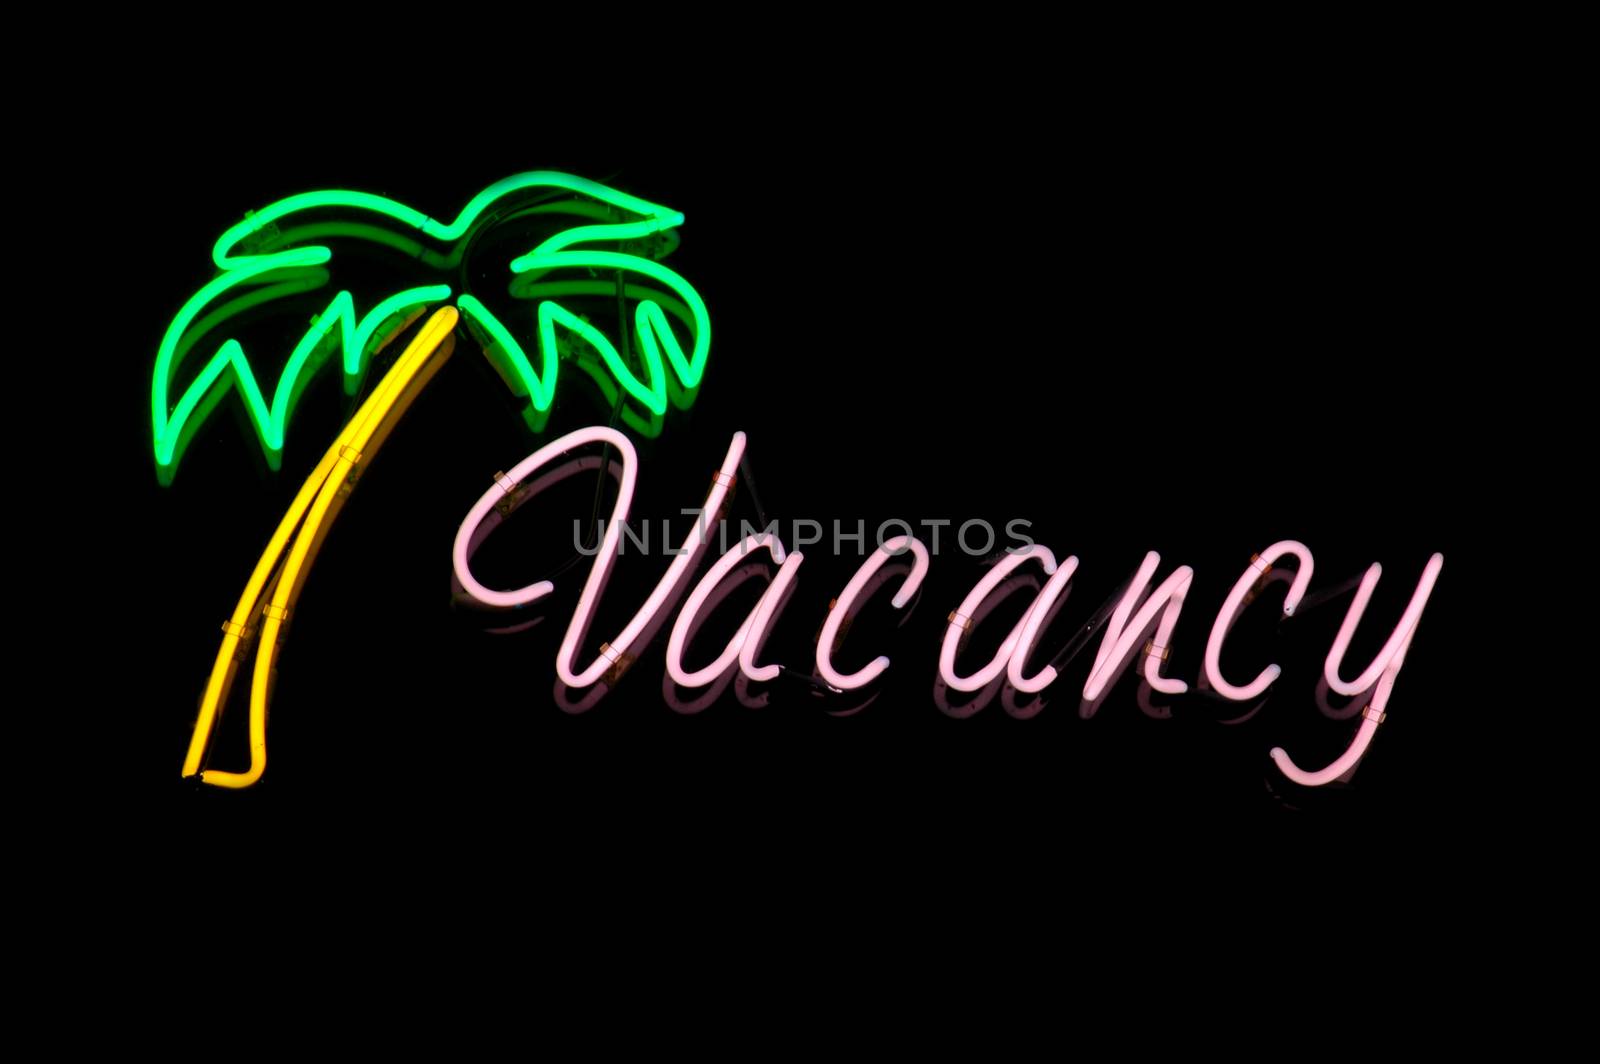 Vacation Image of a Neon Vacancy Sign at a Hotel or Motel Reception